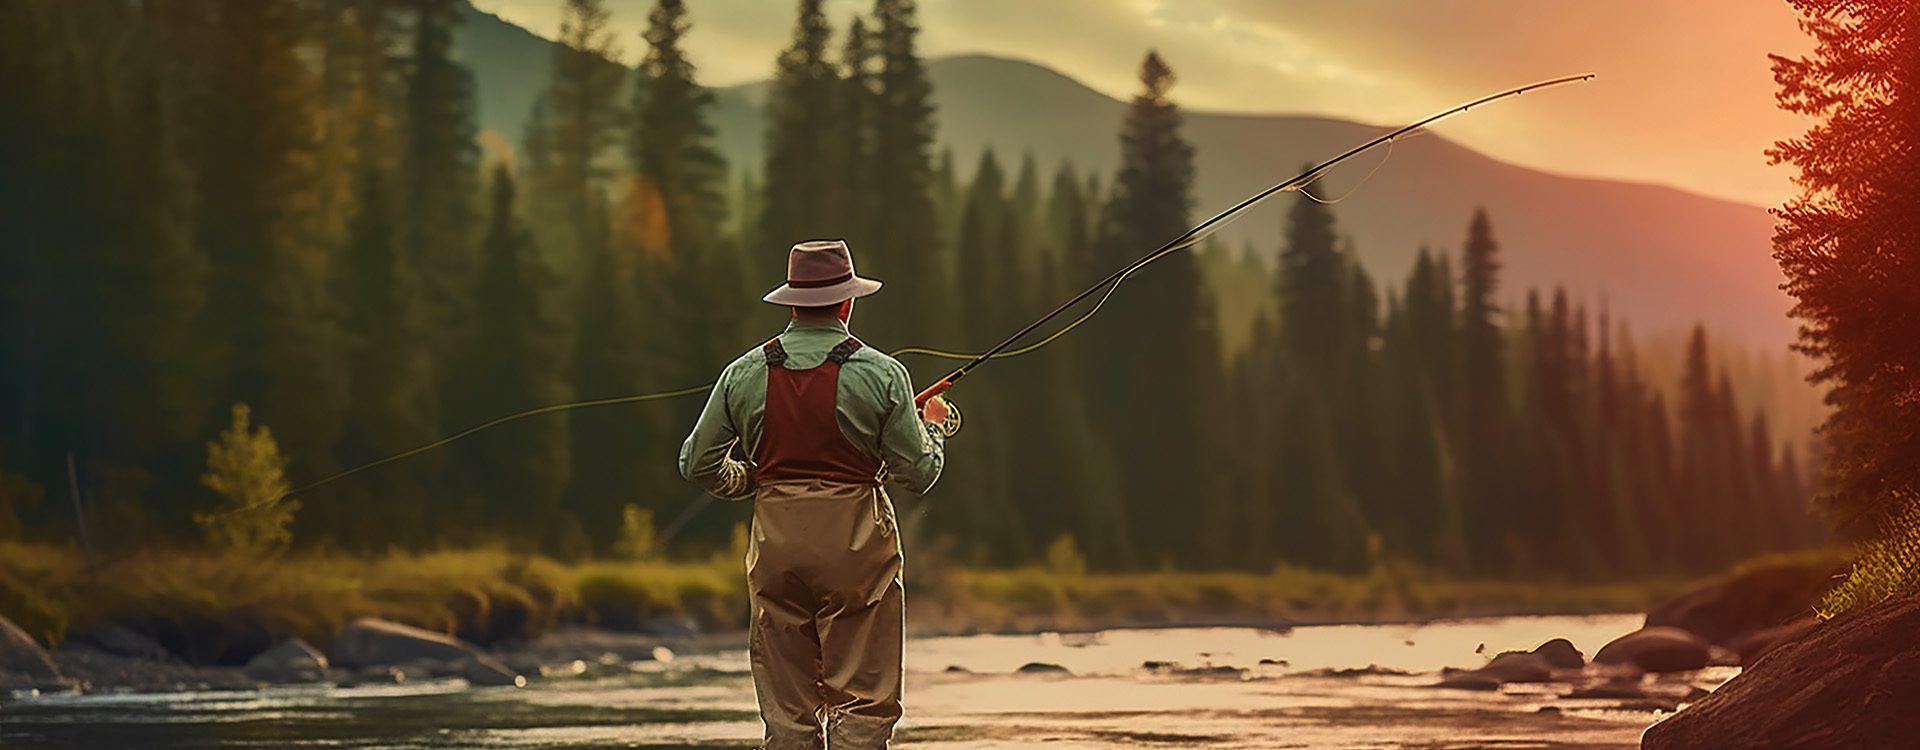 Man Fly Fishing in river for Enter to win promotion